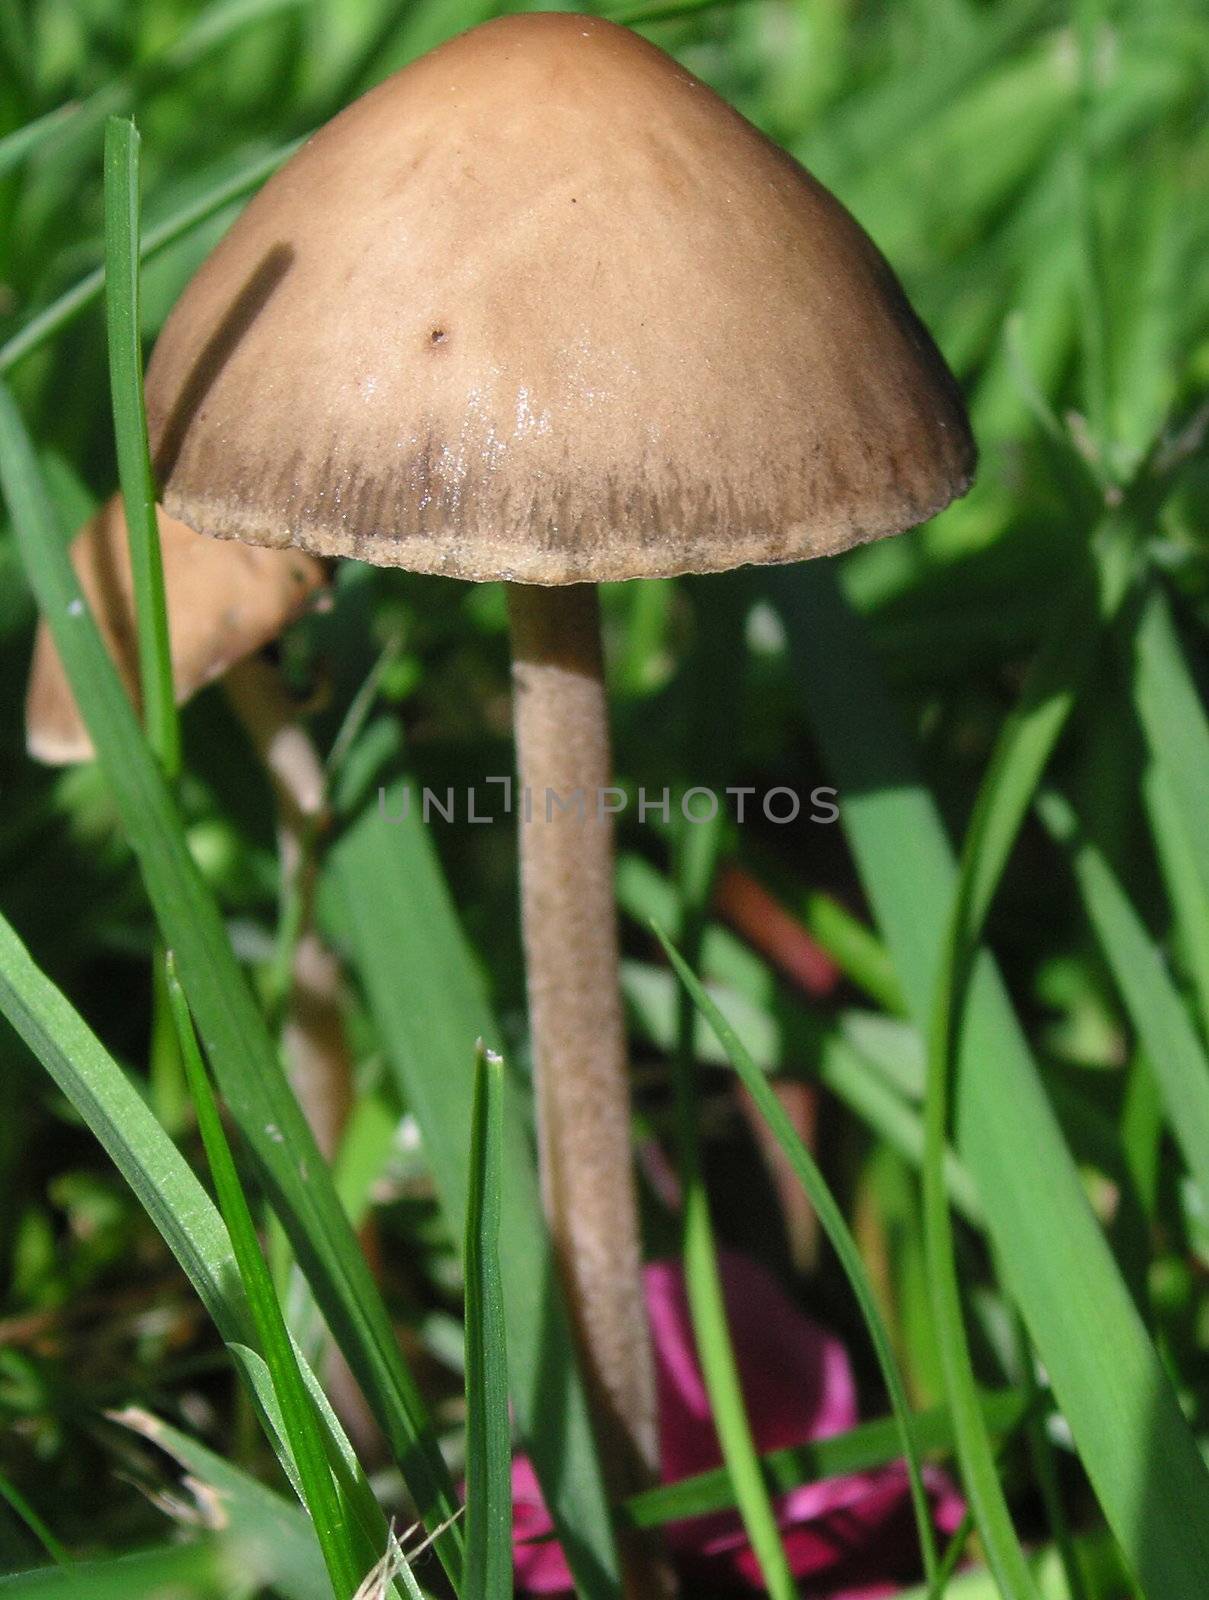 macro shot of a wild toadstool growing among the blades of grass